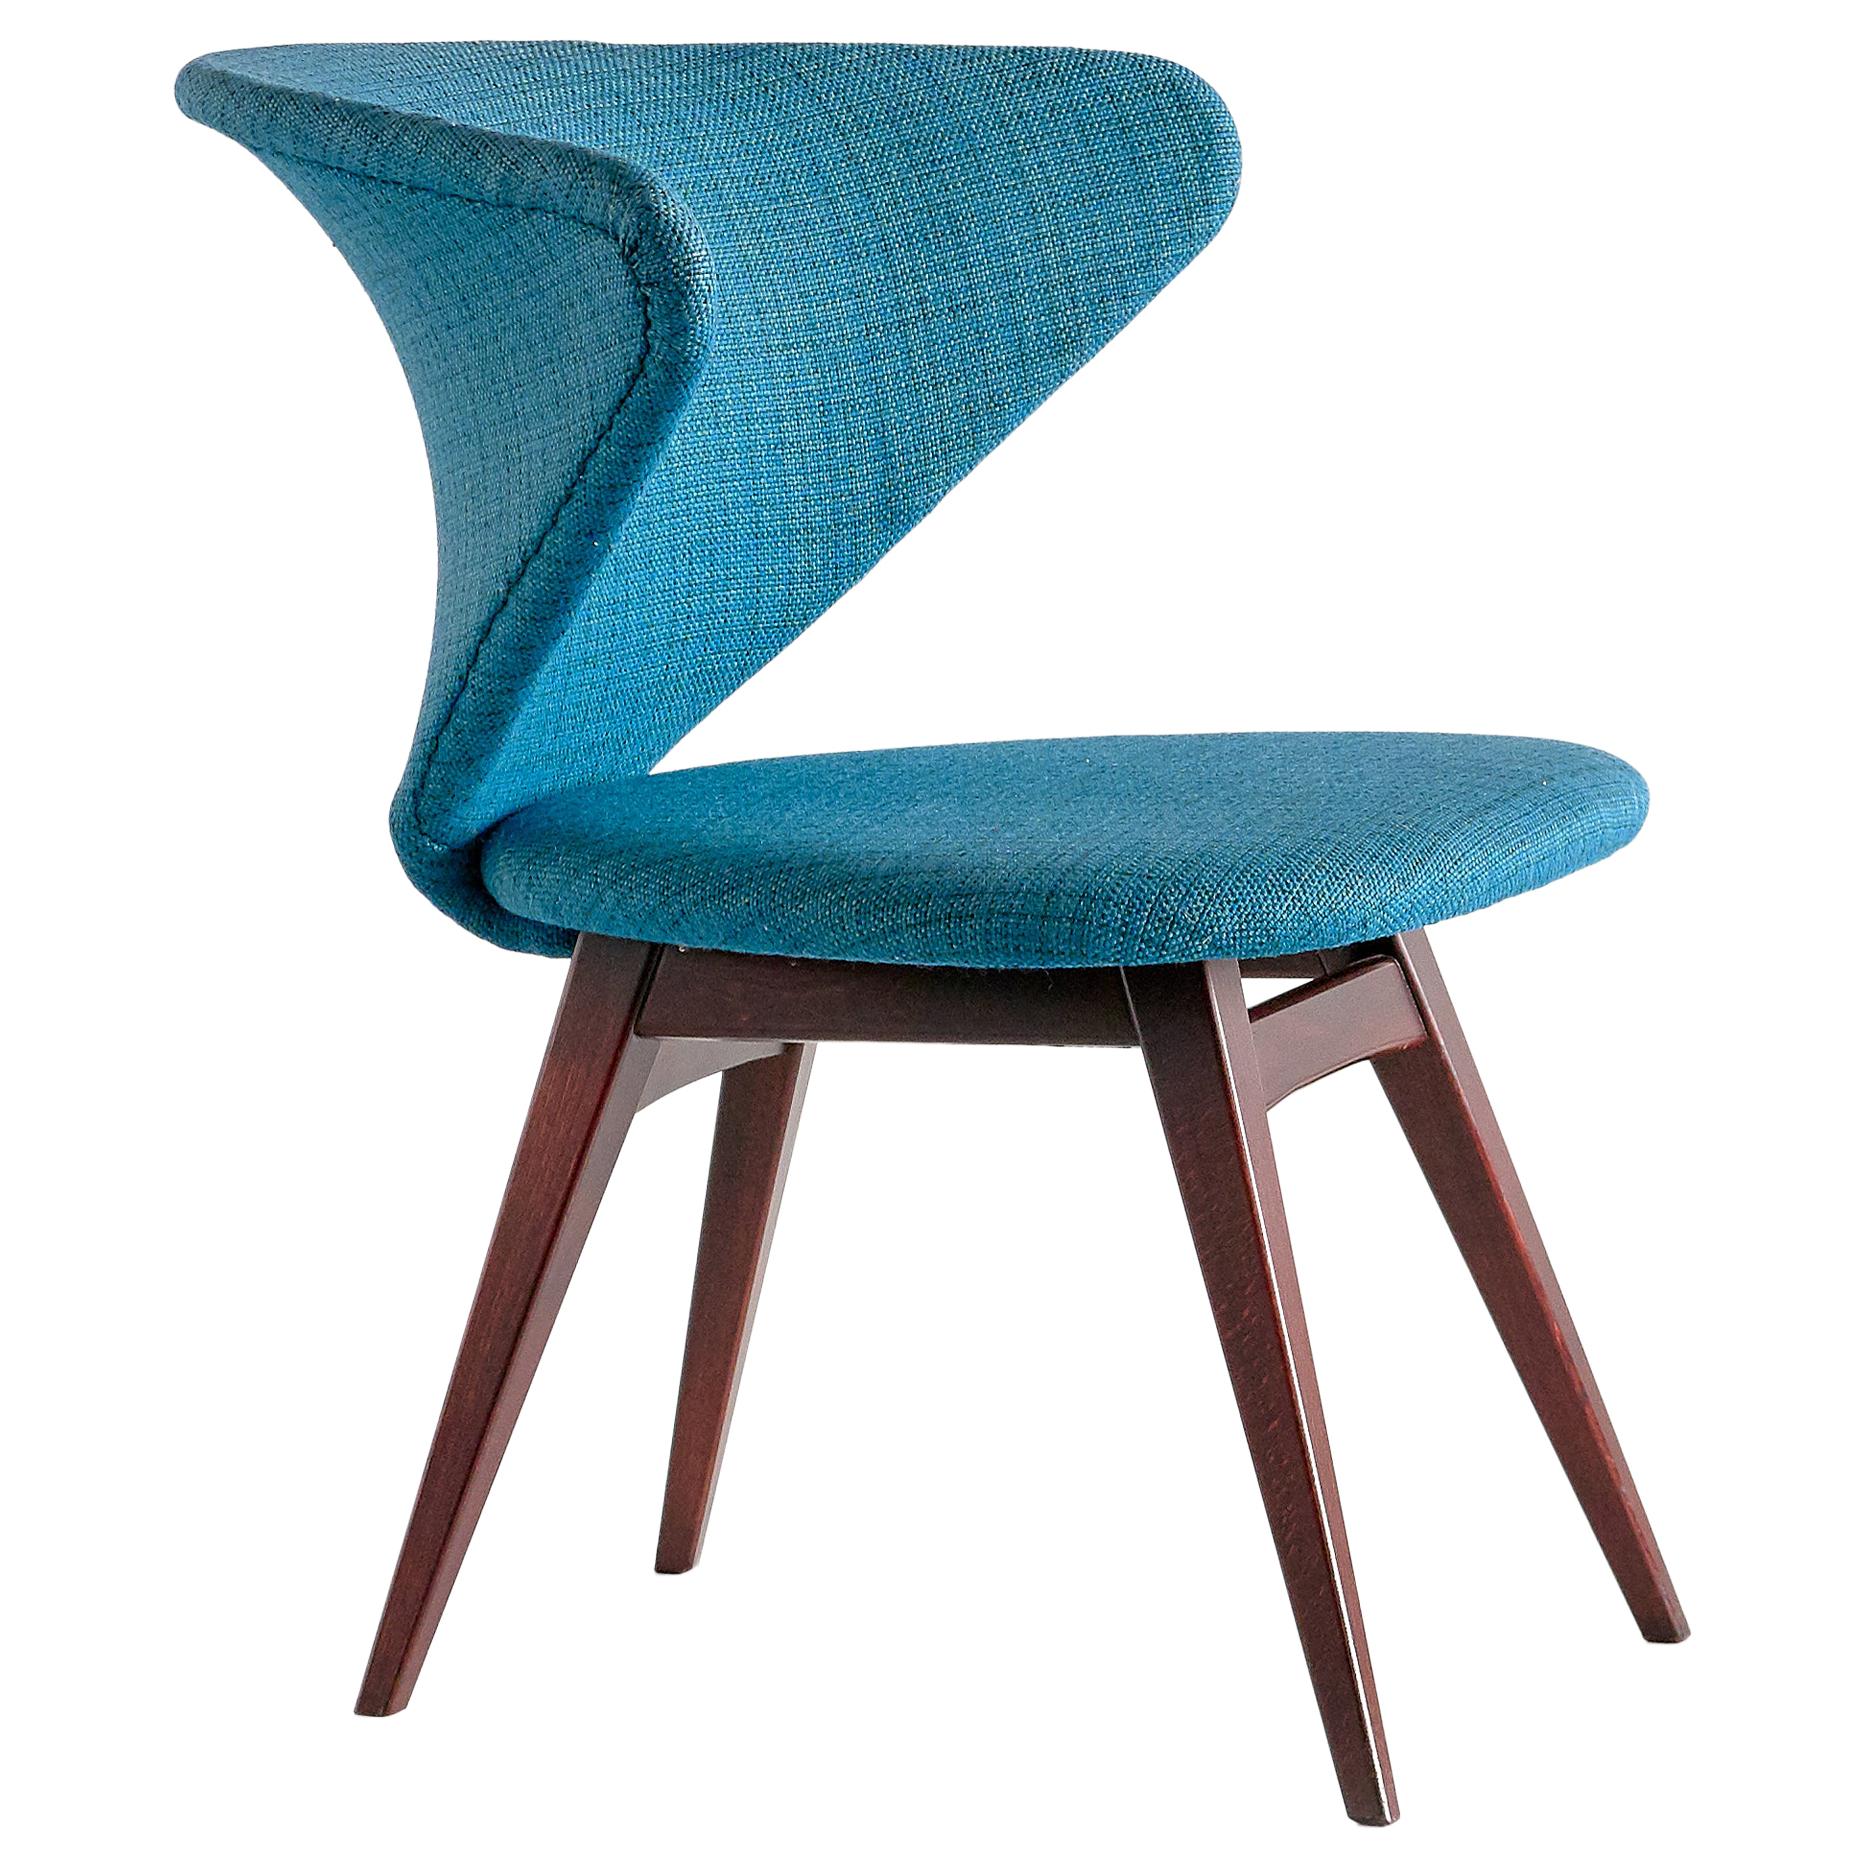 Sigfrid Ljungqvist Wing Shaped Chair, Petrol Blue Fabric and Beech, Sweden, 1958 For Sale